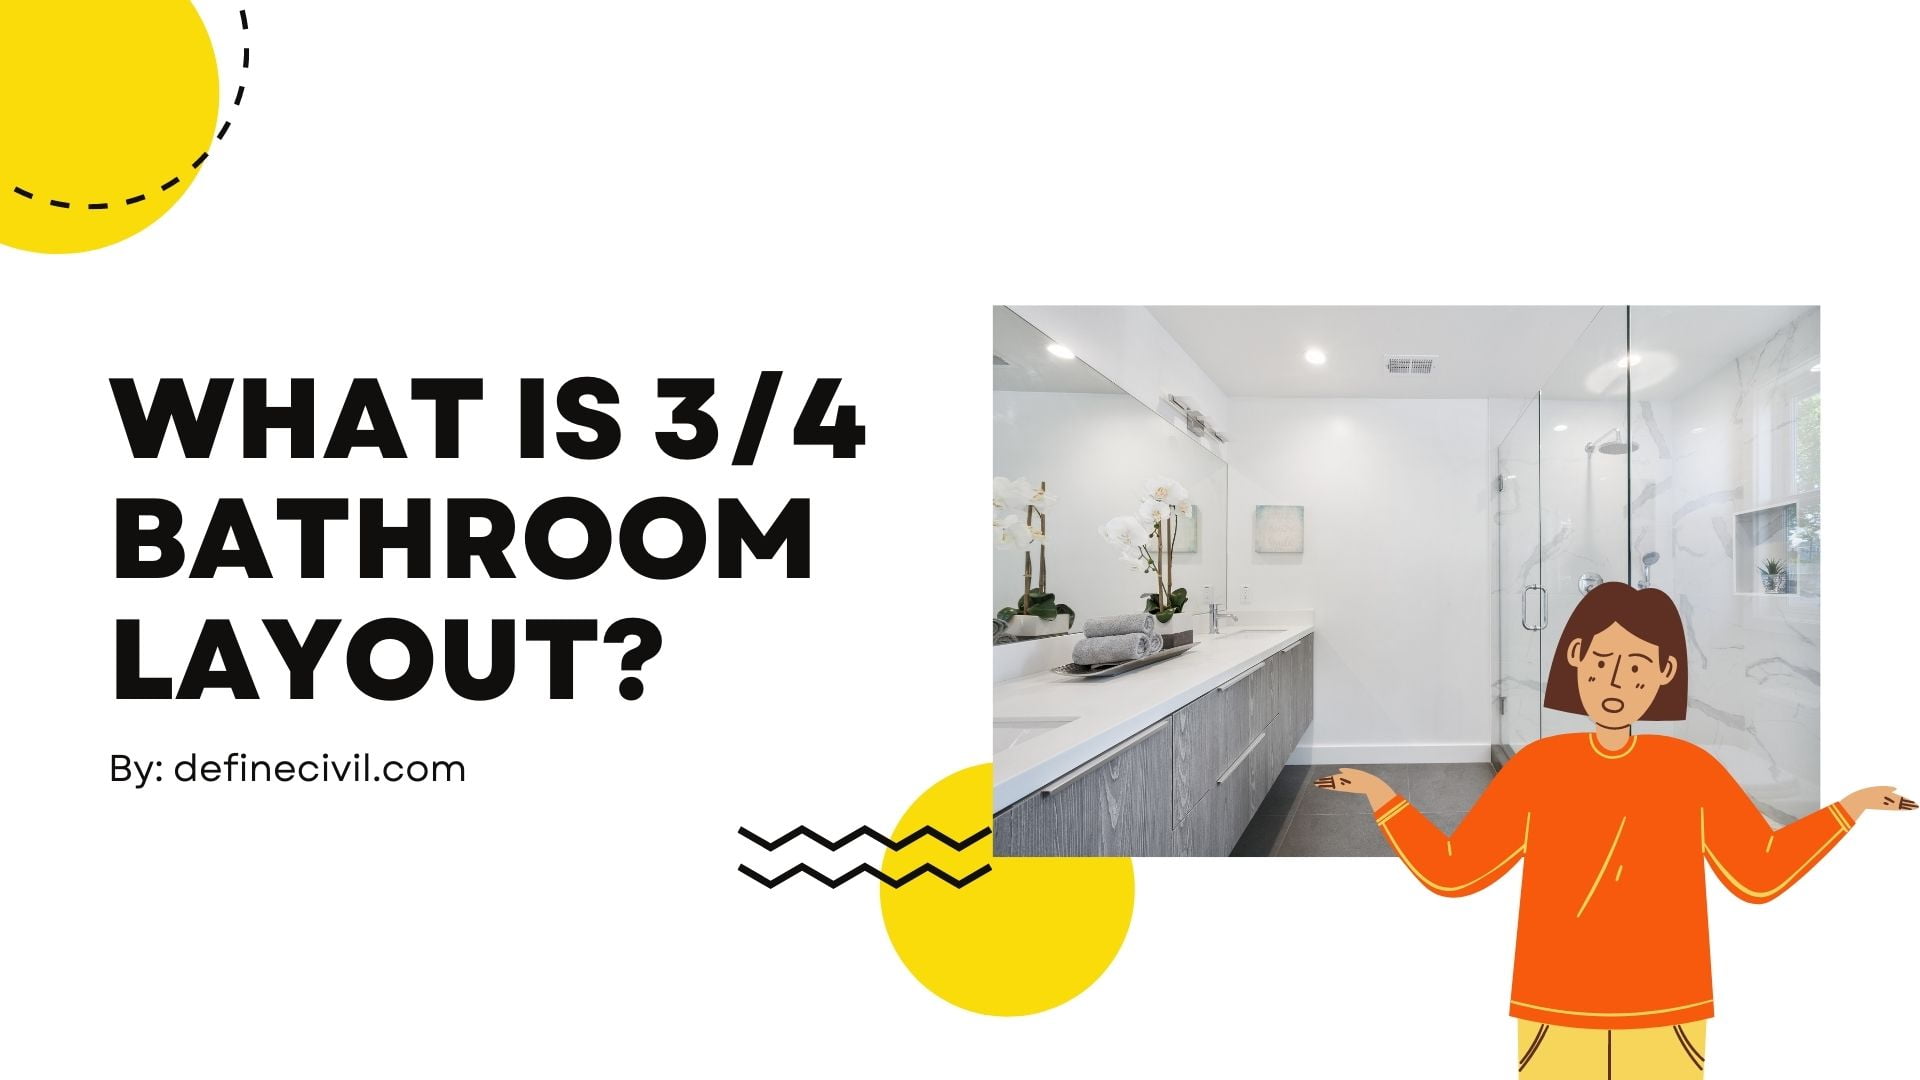 What is 3/4 bathroom layout?